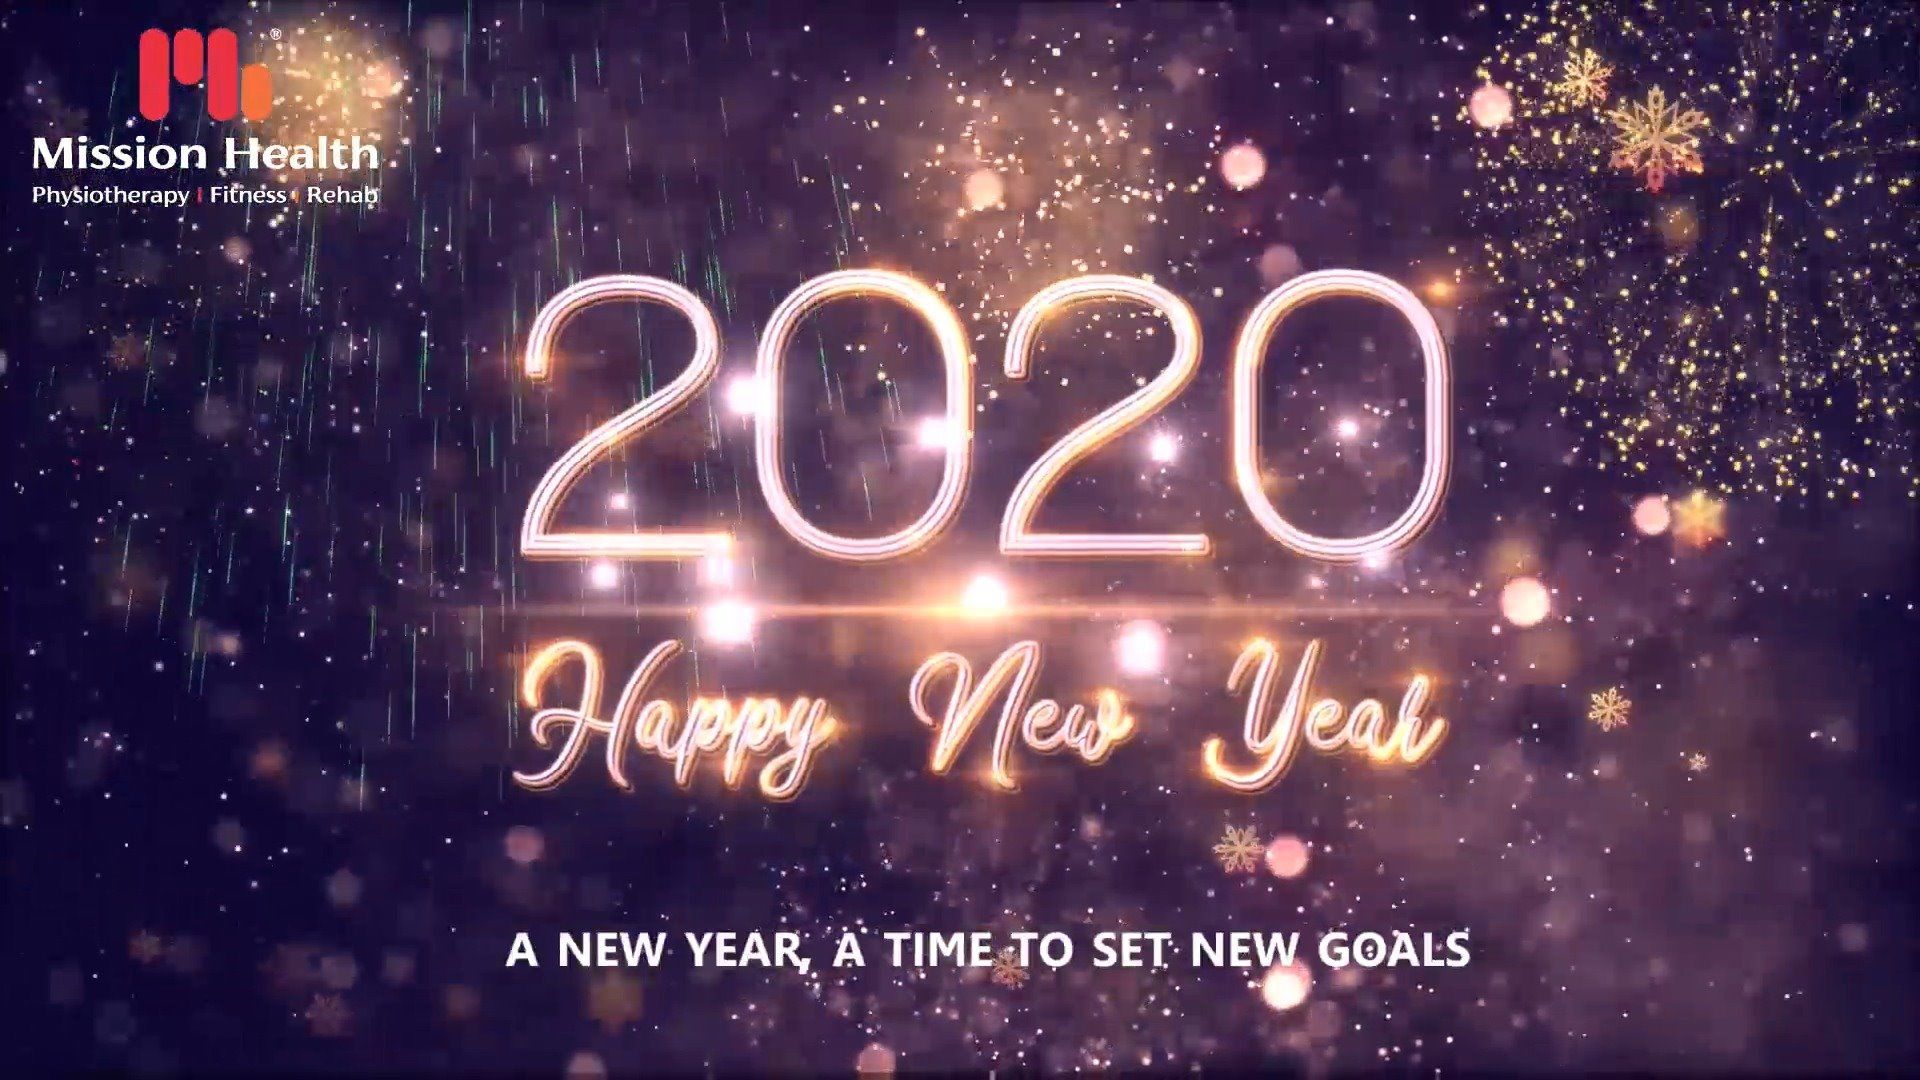 A Happy New Year to all our Patrons.
May year 2020 be a Joyful Journey of Health Wealth & Happiness

#NewYear2020 #HappyNewYear #NewYear #Happiness #Joy #2k20 #Celebration #MissionHealth #MissionHealthIndia #MovementIsLife